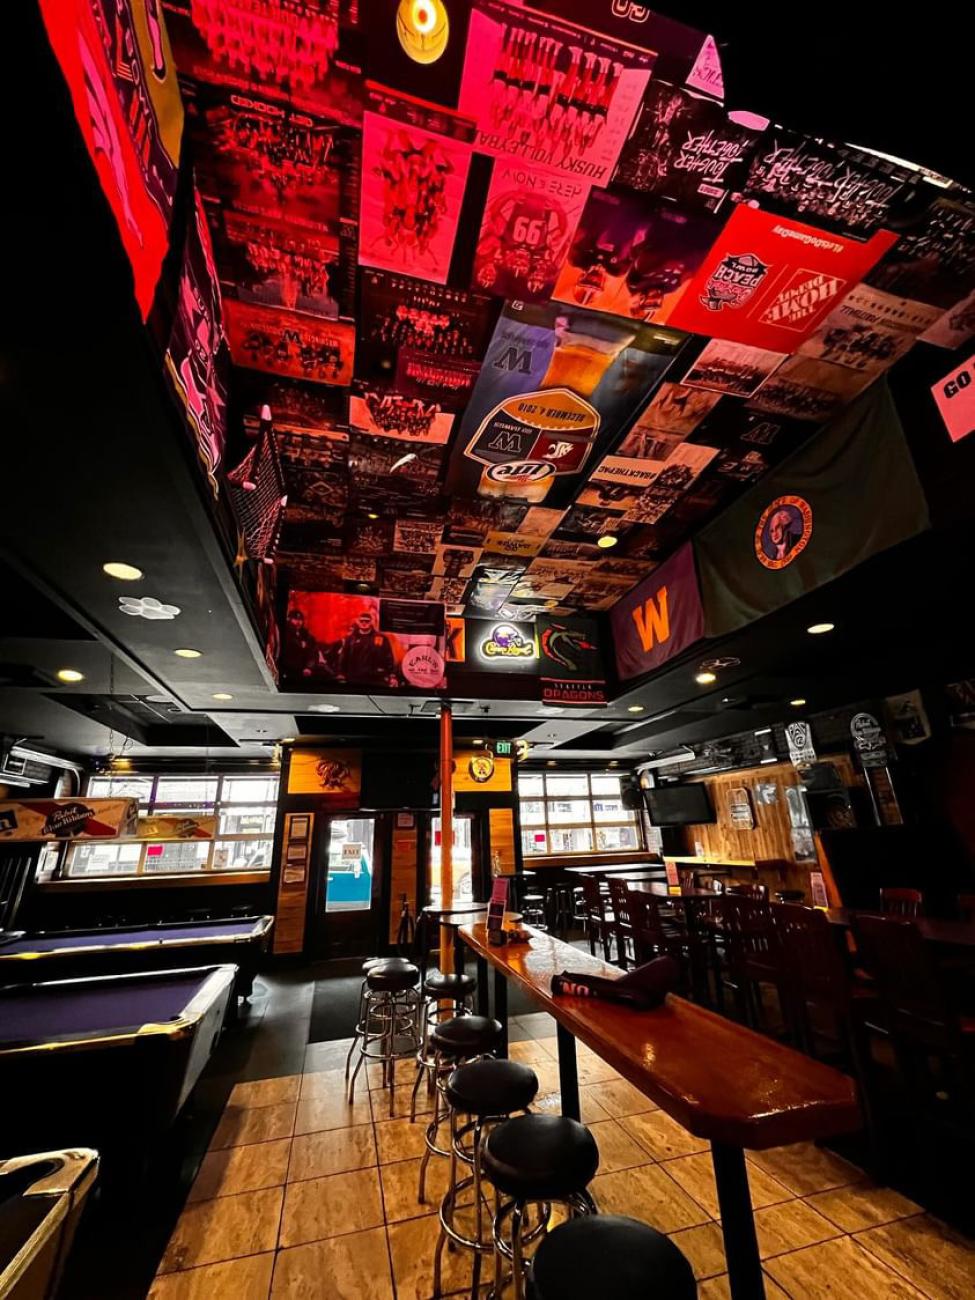 The interior of Earls on the Ave, with seating on the right, pool tables on the left and posters on the ceiling